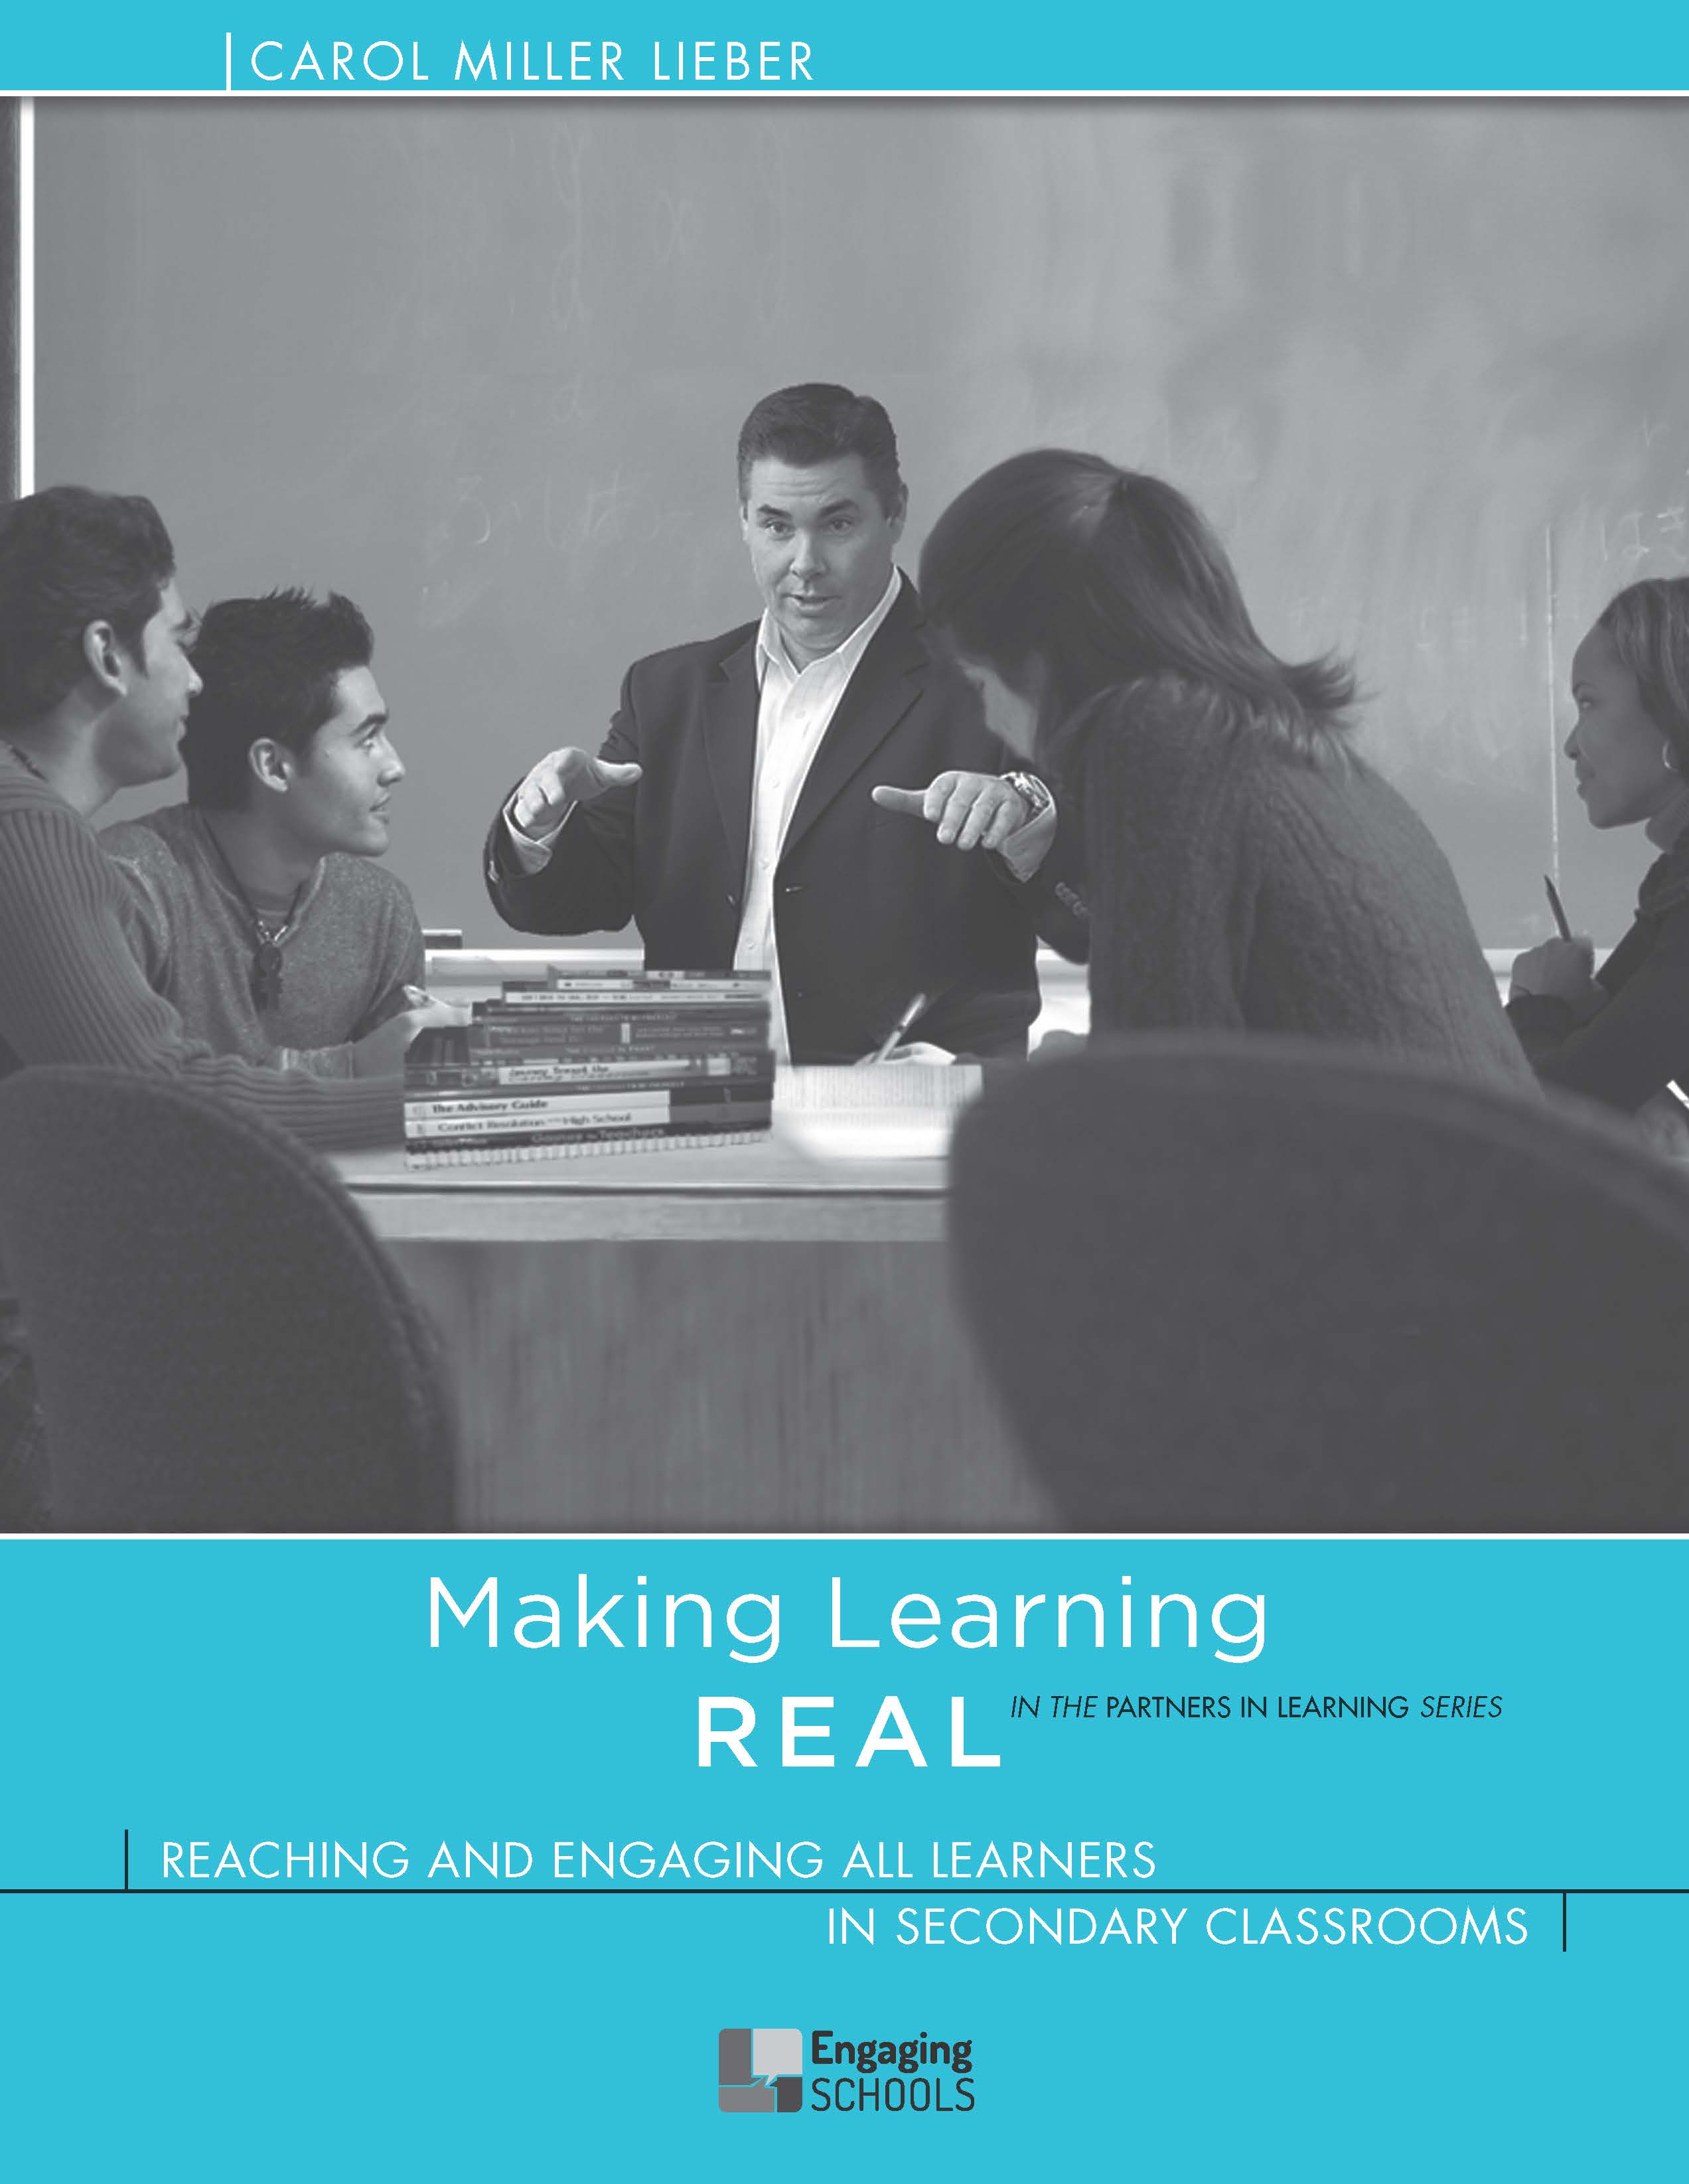 Making Learning Real: Reaching and Engaging All Learners in Secondary Classrooms (PILREA)